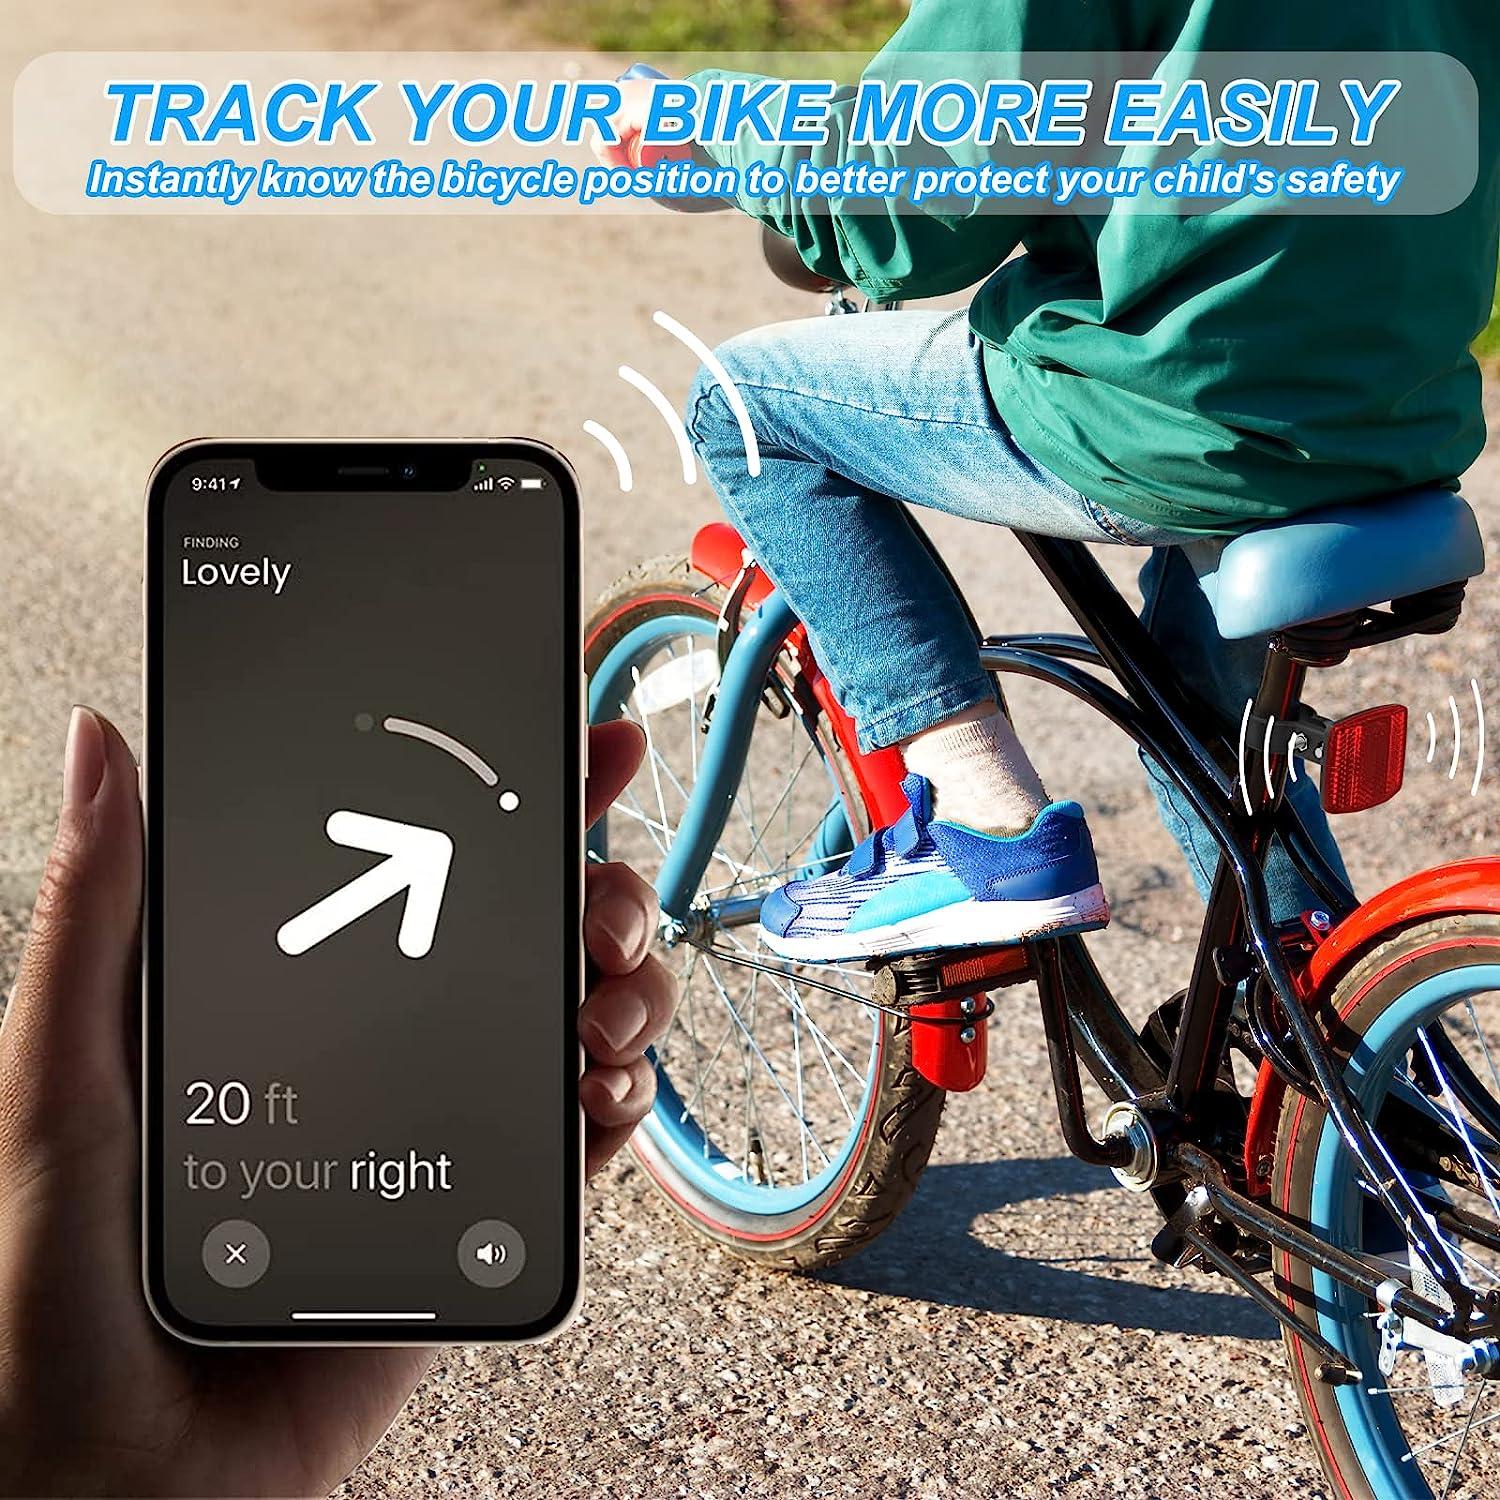 Anti-theft & GPS tracker for bicycle, moped and much more